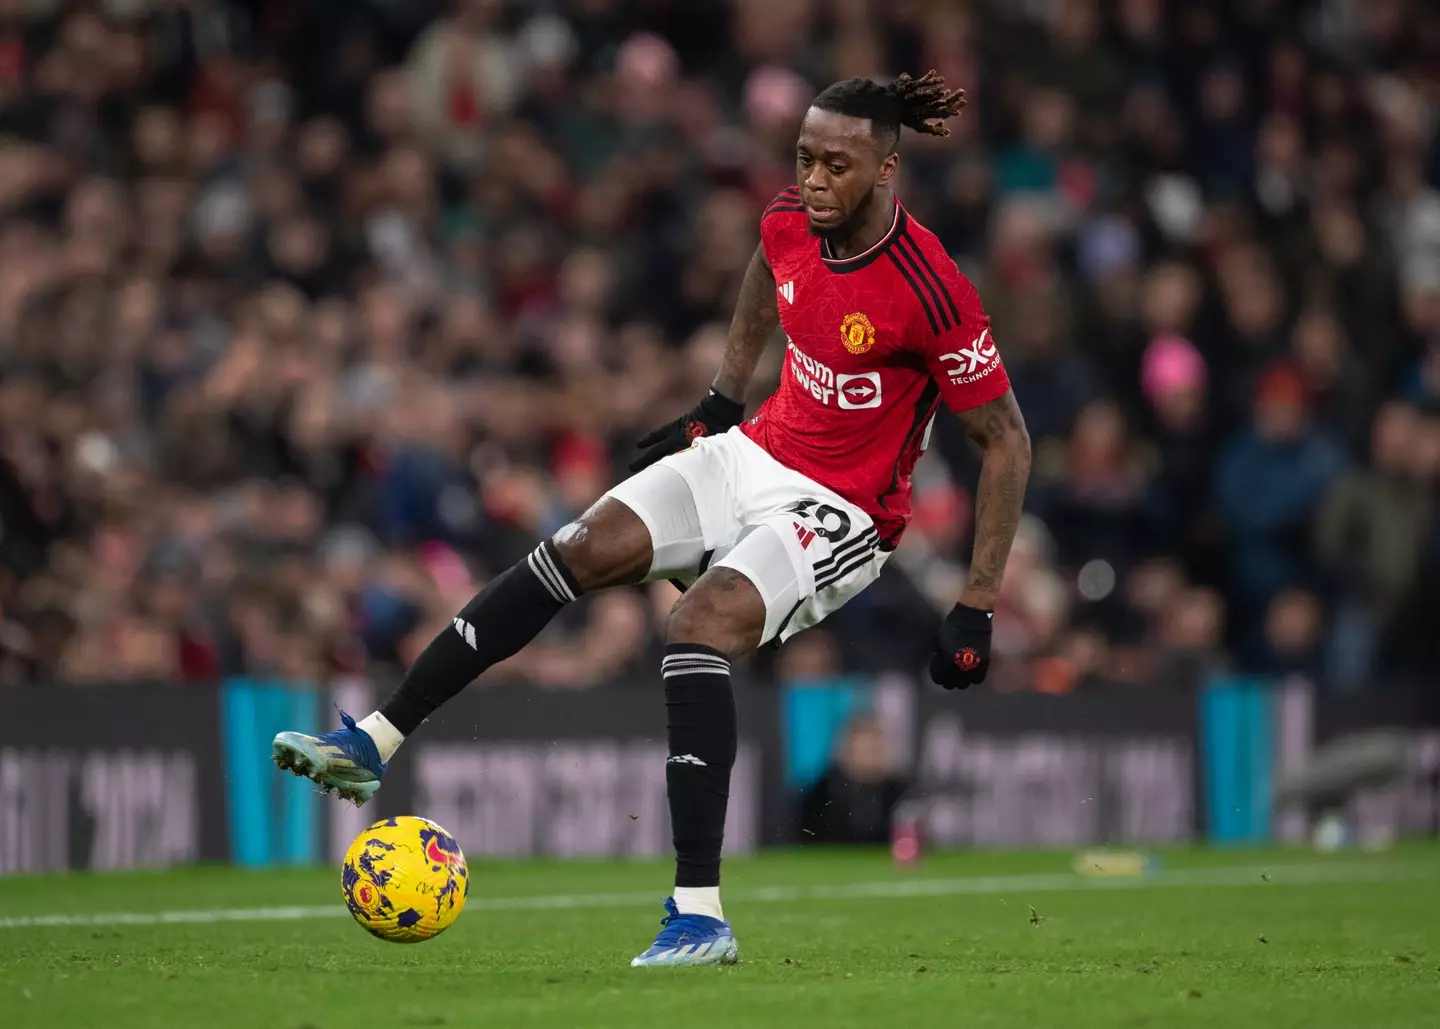 Wan-Bissaka has been an important part of United's defence this season. (Image